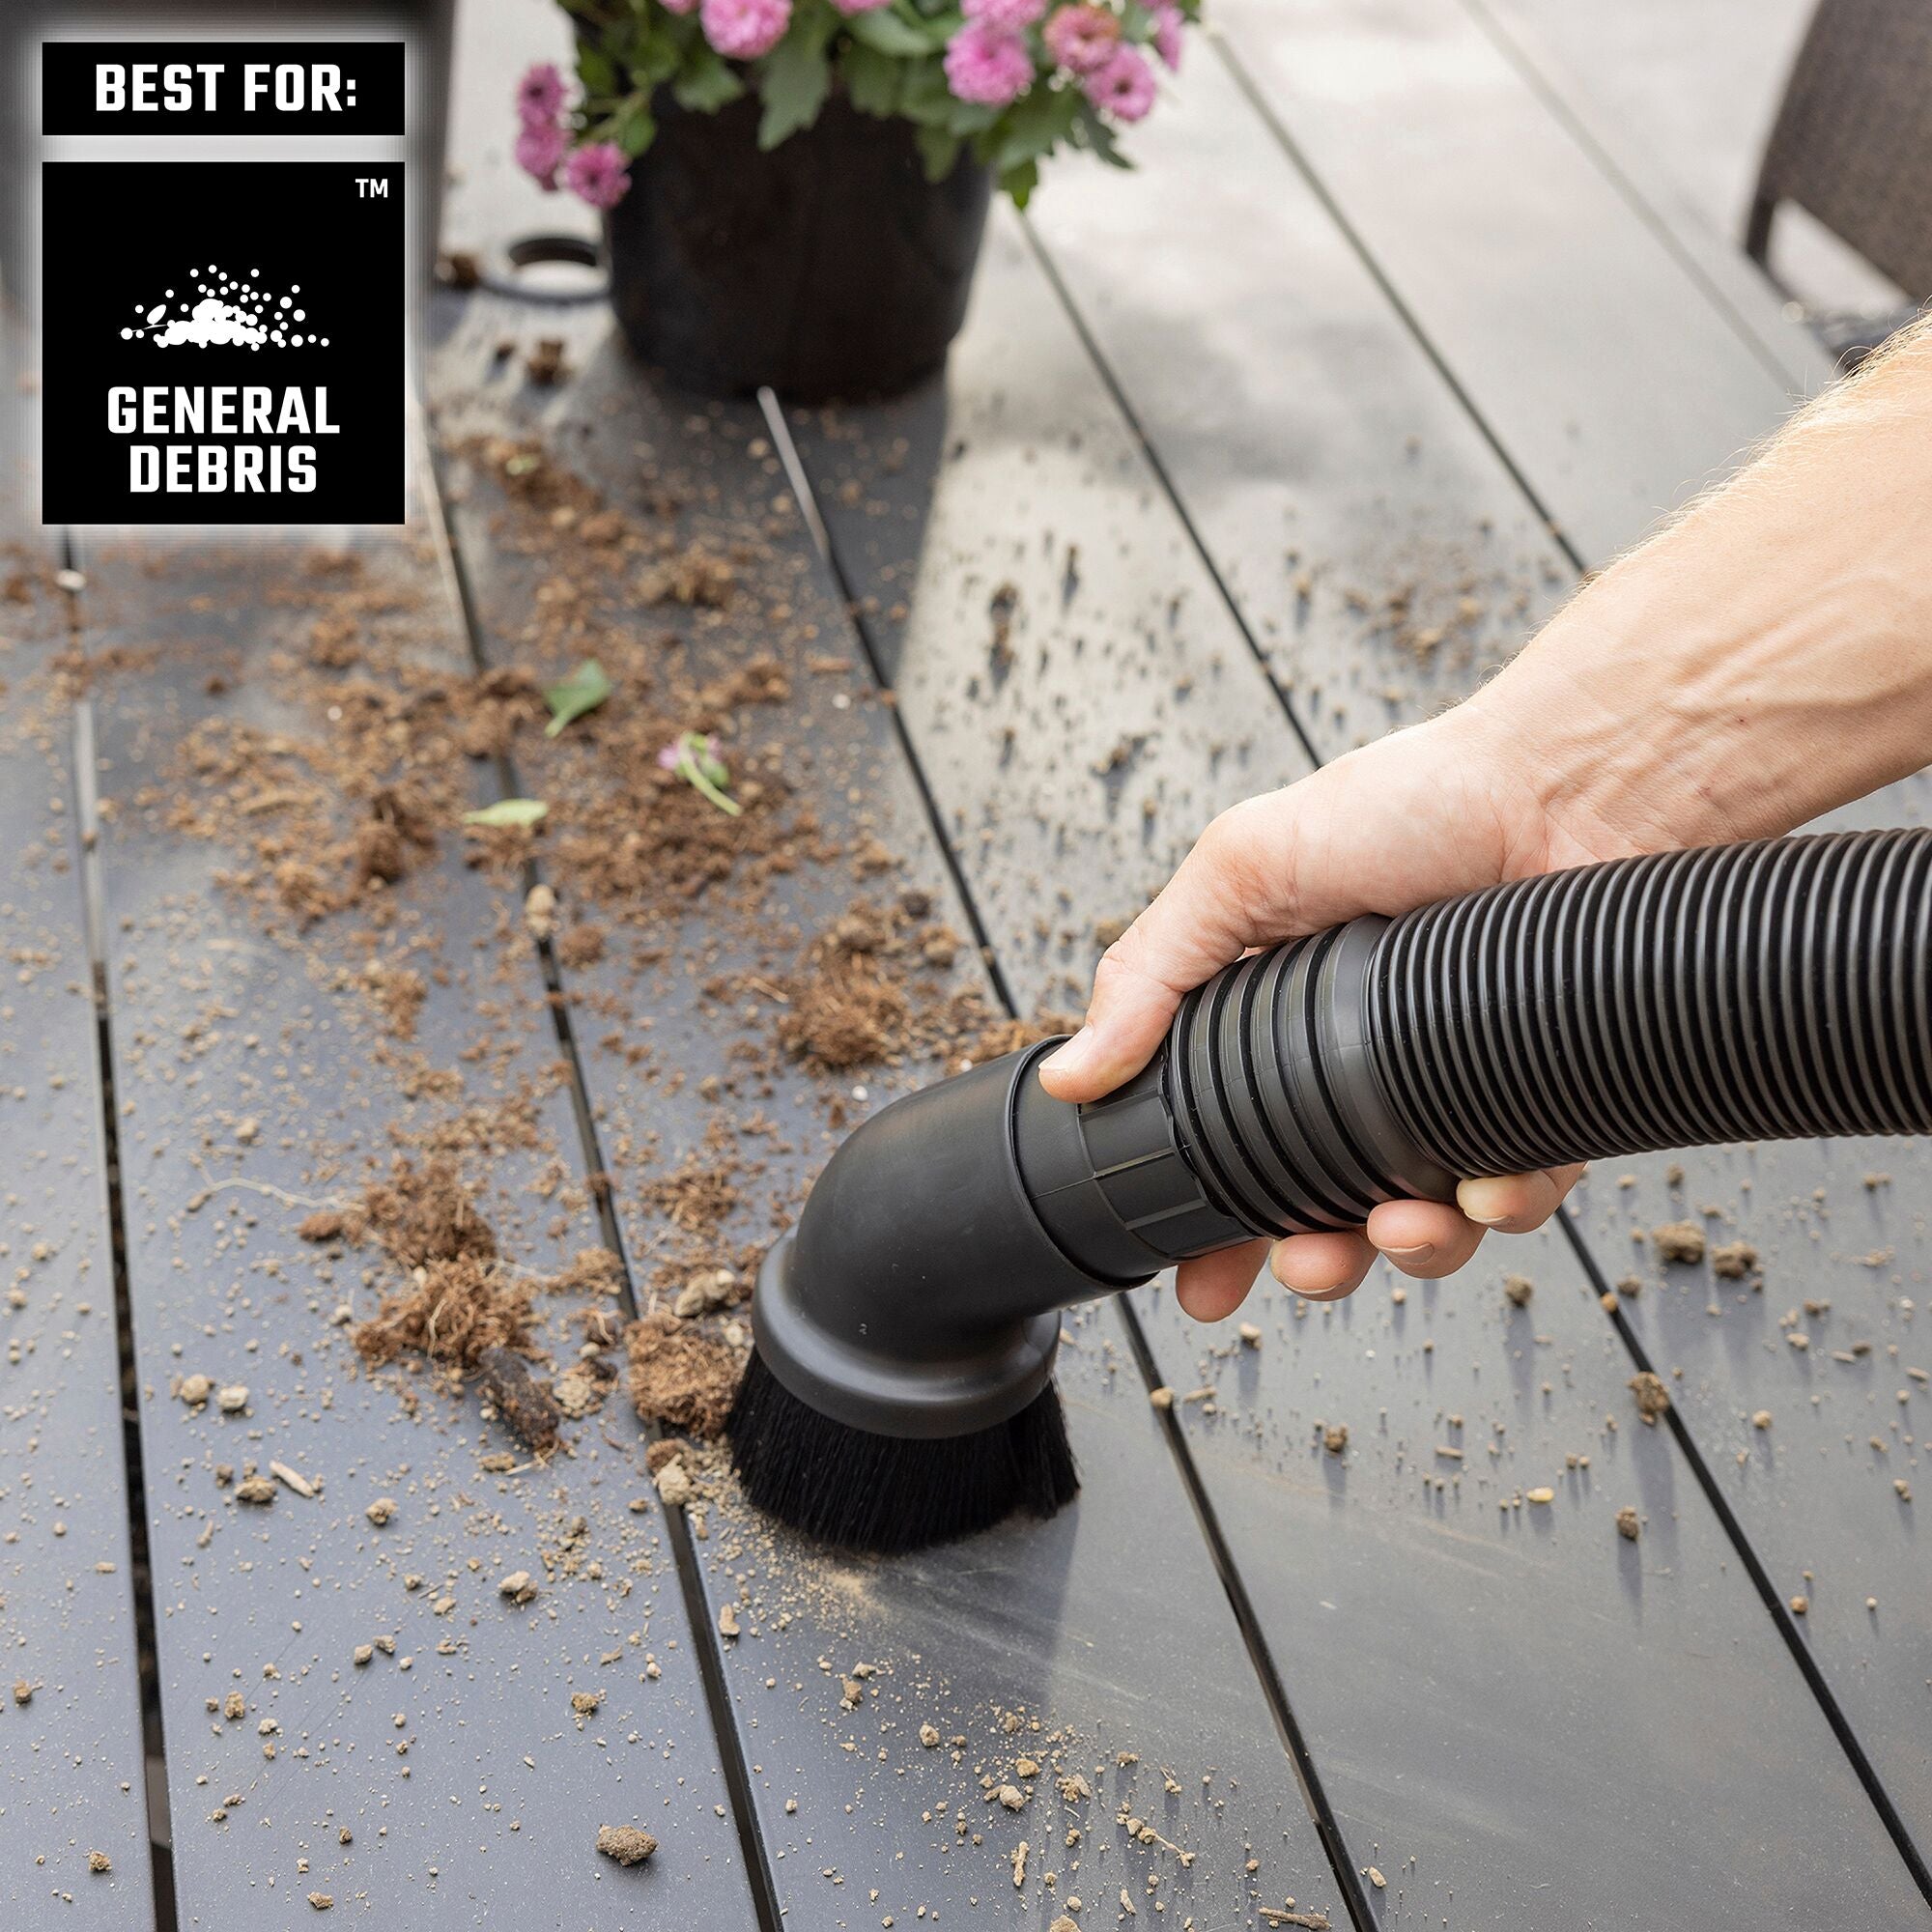 Homeowner using CRAFTSMAN Vac with HEPA Media Filter, Dusting Brush to pickup soil and dirt on deck